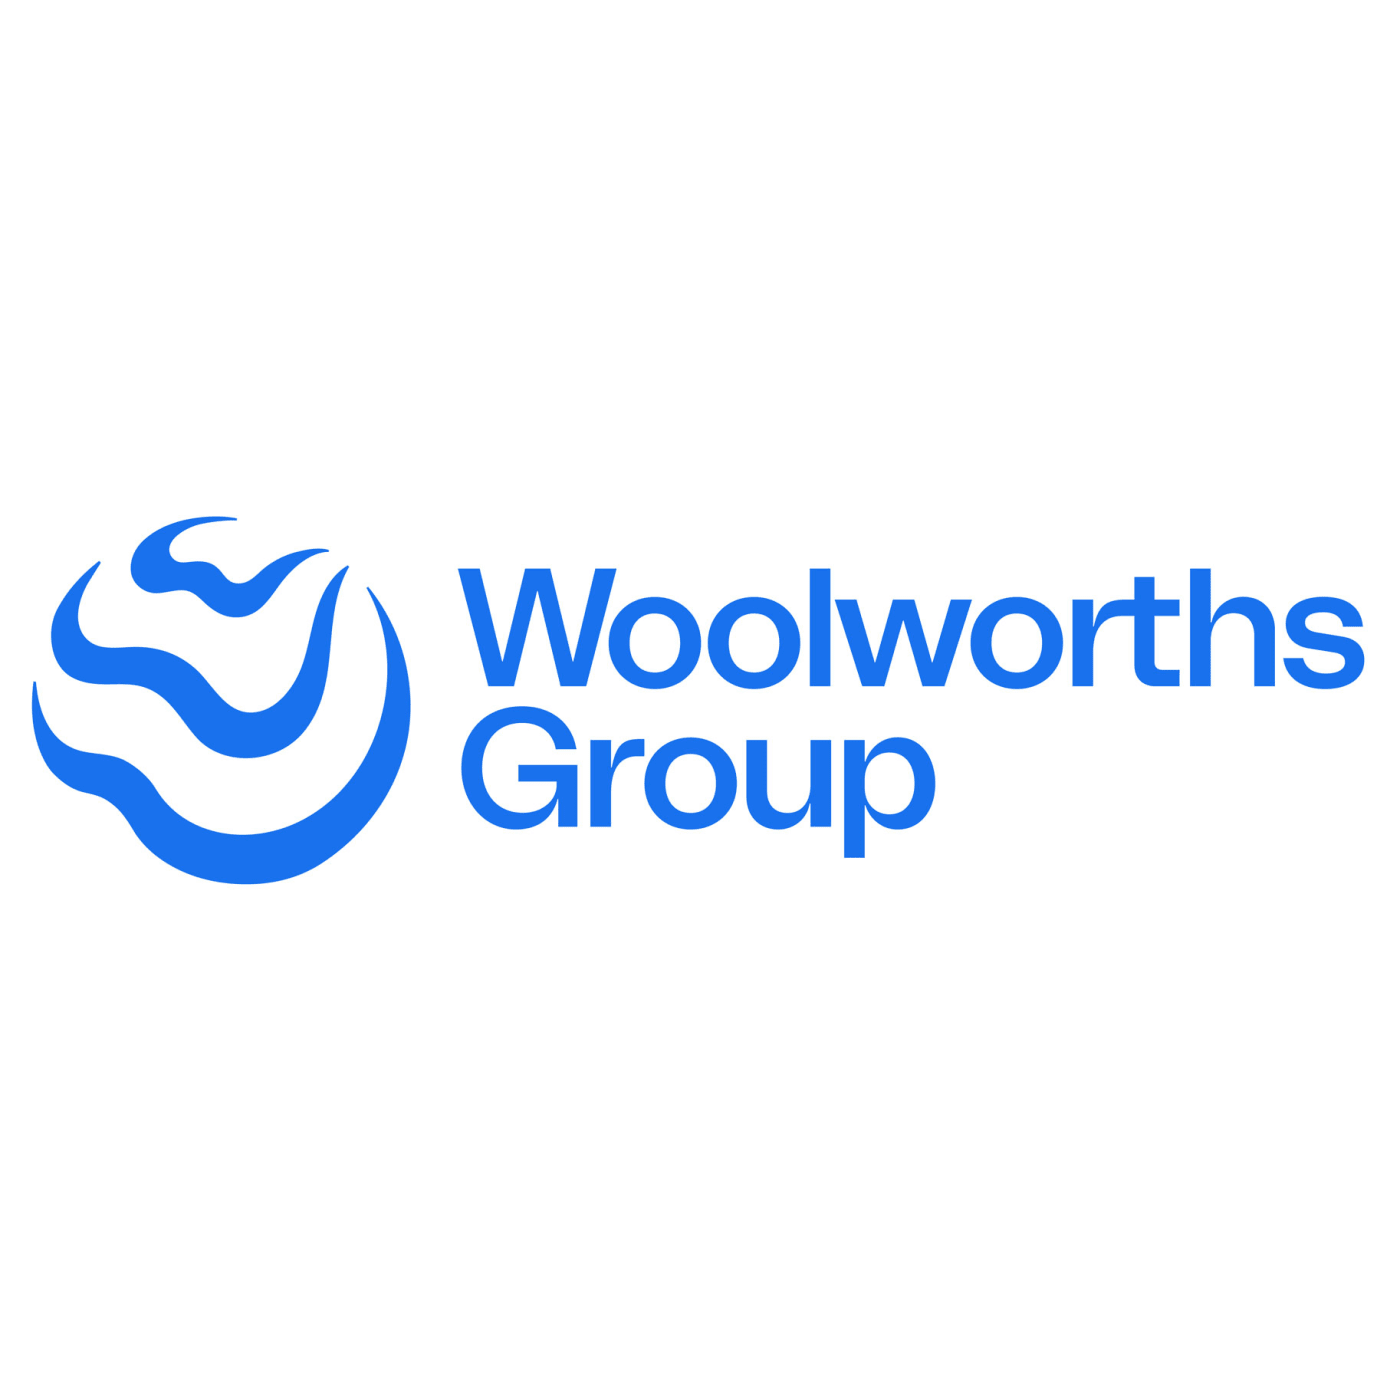 Woolworths Group logo